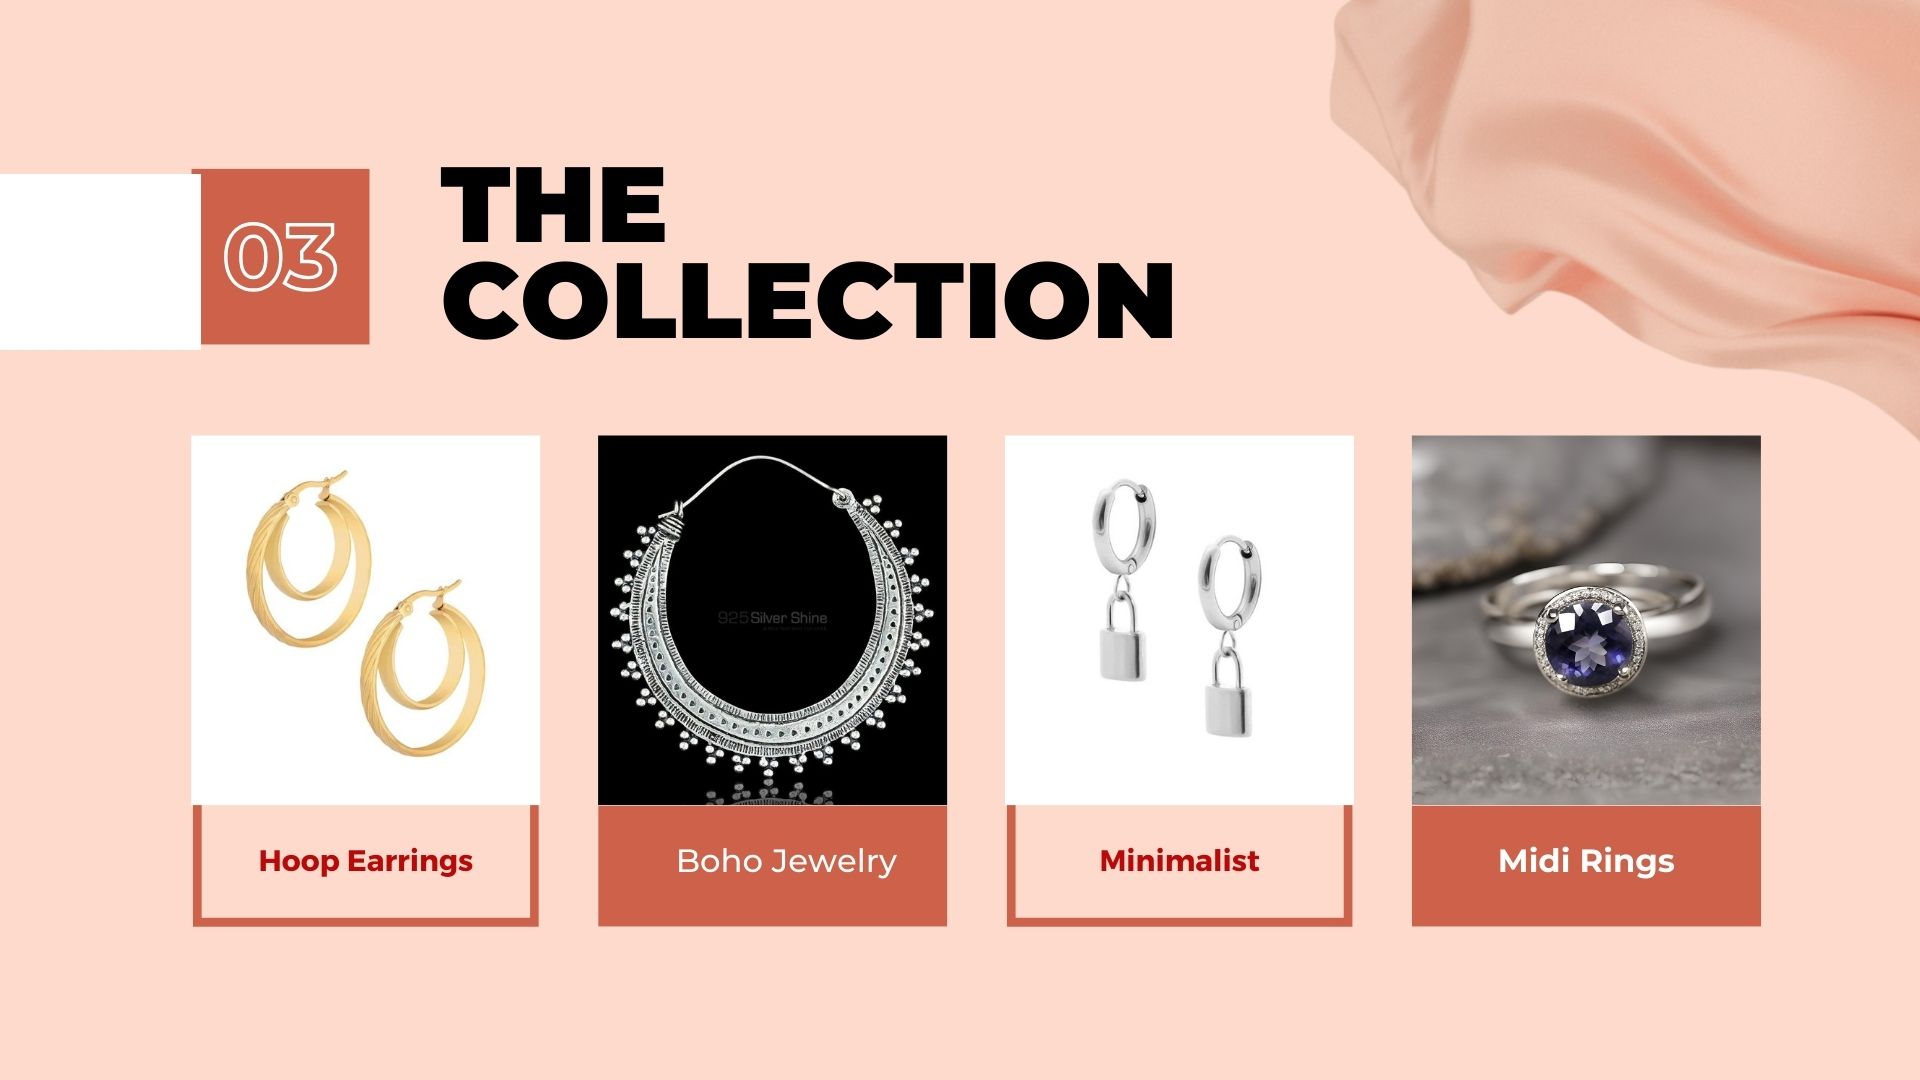 silver jewelry, silver jewelry market, trend of 2024, silver jewelry, jewelry trends 2024, 2024 trends fashion jewelry, trend earrings 2024, how to store silver jewlery, trending gifts 2024, best sterling silver jewelry, sterling silver zodiac jewelry, summer jewelry trend in june 2024, what is the symbol for silver on jewelry, silver rings market in Inida, silver jewelry trends in july 2024, silver jewelry, silver jewelry market in india, Indian jewelrygain popularity worldwide, Indian jewelry buy from USA, jewelry trends in UK, biggest fashion Industry, Largest silver jewelry market, silver good for jewelry making, trending silver jewelry in 2024, which jewelry trending in june month, july birthstone, birthstone trend, silver gemstone jewelry, custom silver jewelry wholesale, explore jewelry market, jewelry market in USA, silver jewelry export in Australia, top famous jewelry in 2024, sterling silver earrings, hoop earrings, bangles, sterling silver wedding rings, modern silver anklets with stones, 925 sterling silver, 925 silver jewelry supply, silver jewelry market in India, wholesale jewelry supply, silver jewelry manufacturing company, jewelry manufacturer in Jaipur, minimalist jewelry, vintage silver jewelry, boho jewelry, symbol jewelry, love jewelry, silver jewellery, sterling silver jewellery, wholesale jewellery supply, jewelry export in america 